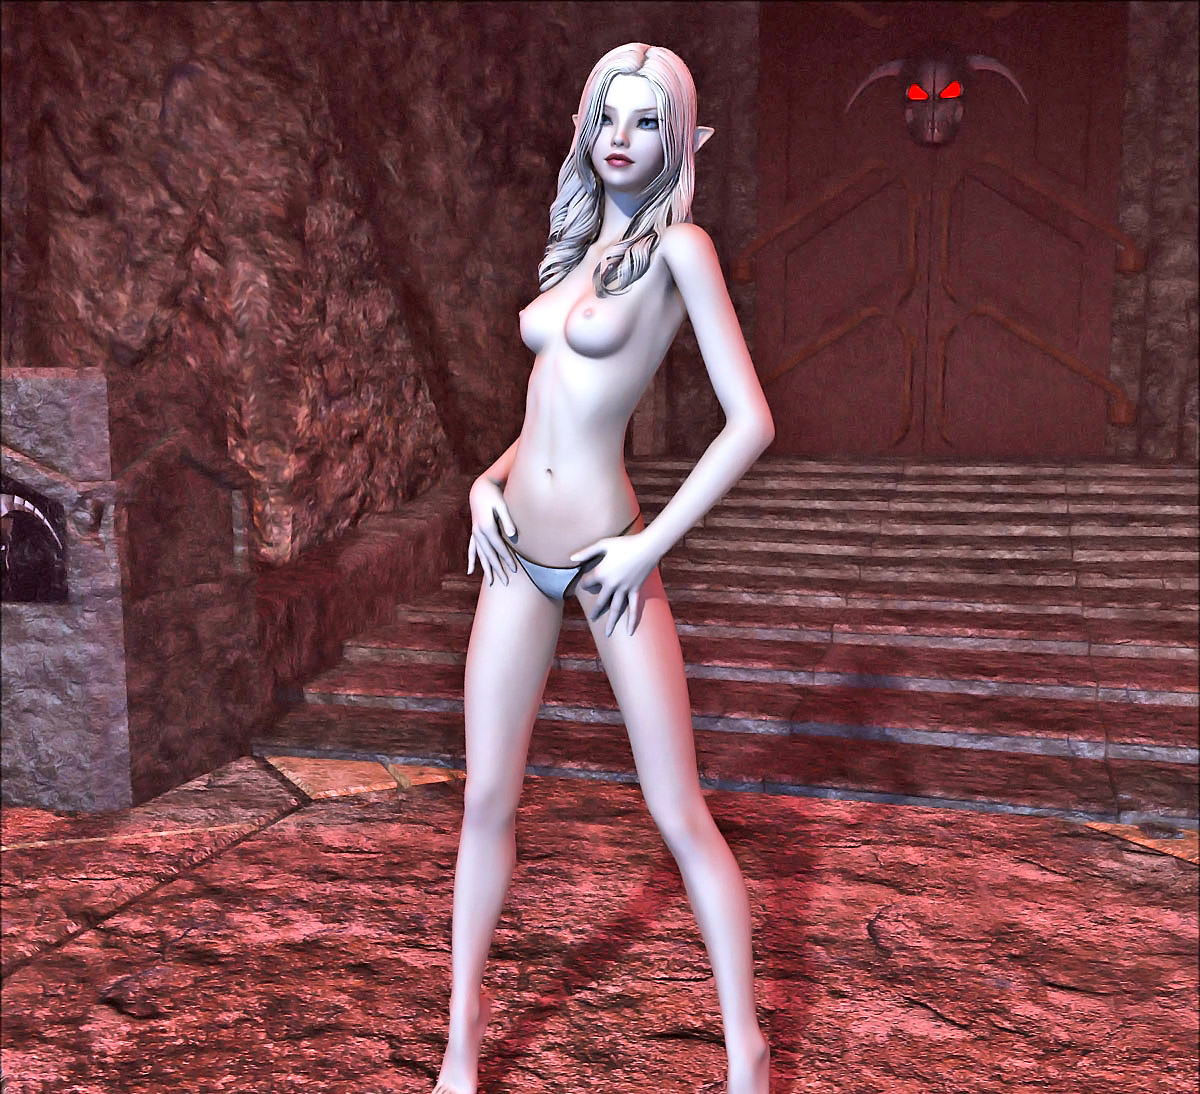 3d Sexy Elf - Grotesque 3d hd gallery featuring sexy elf babes fucked by fierce demons. |  KingdomOfEvil 3d